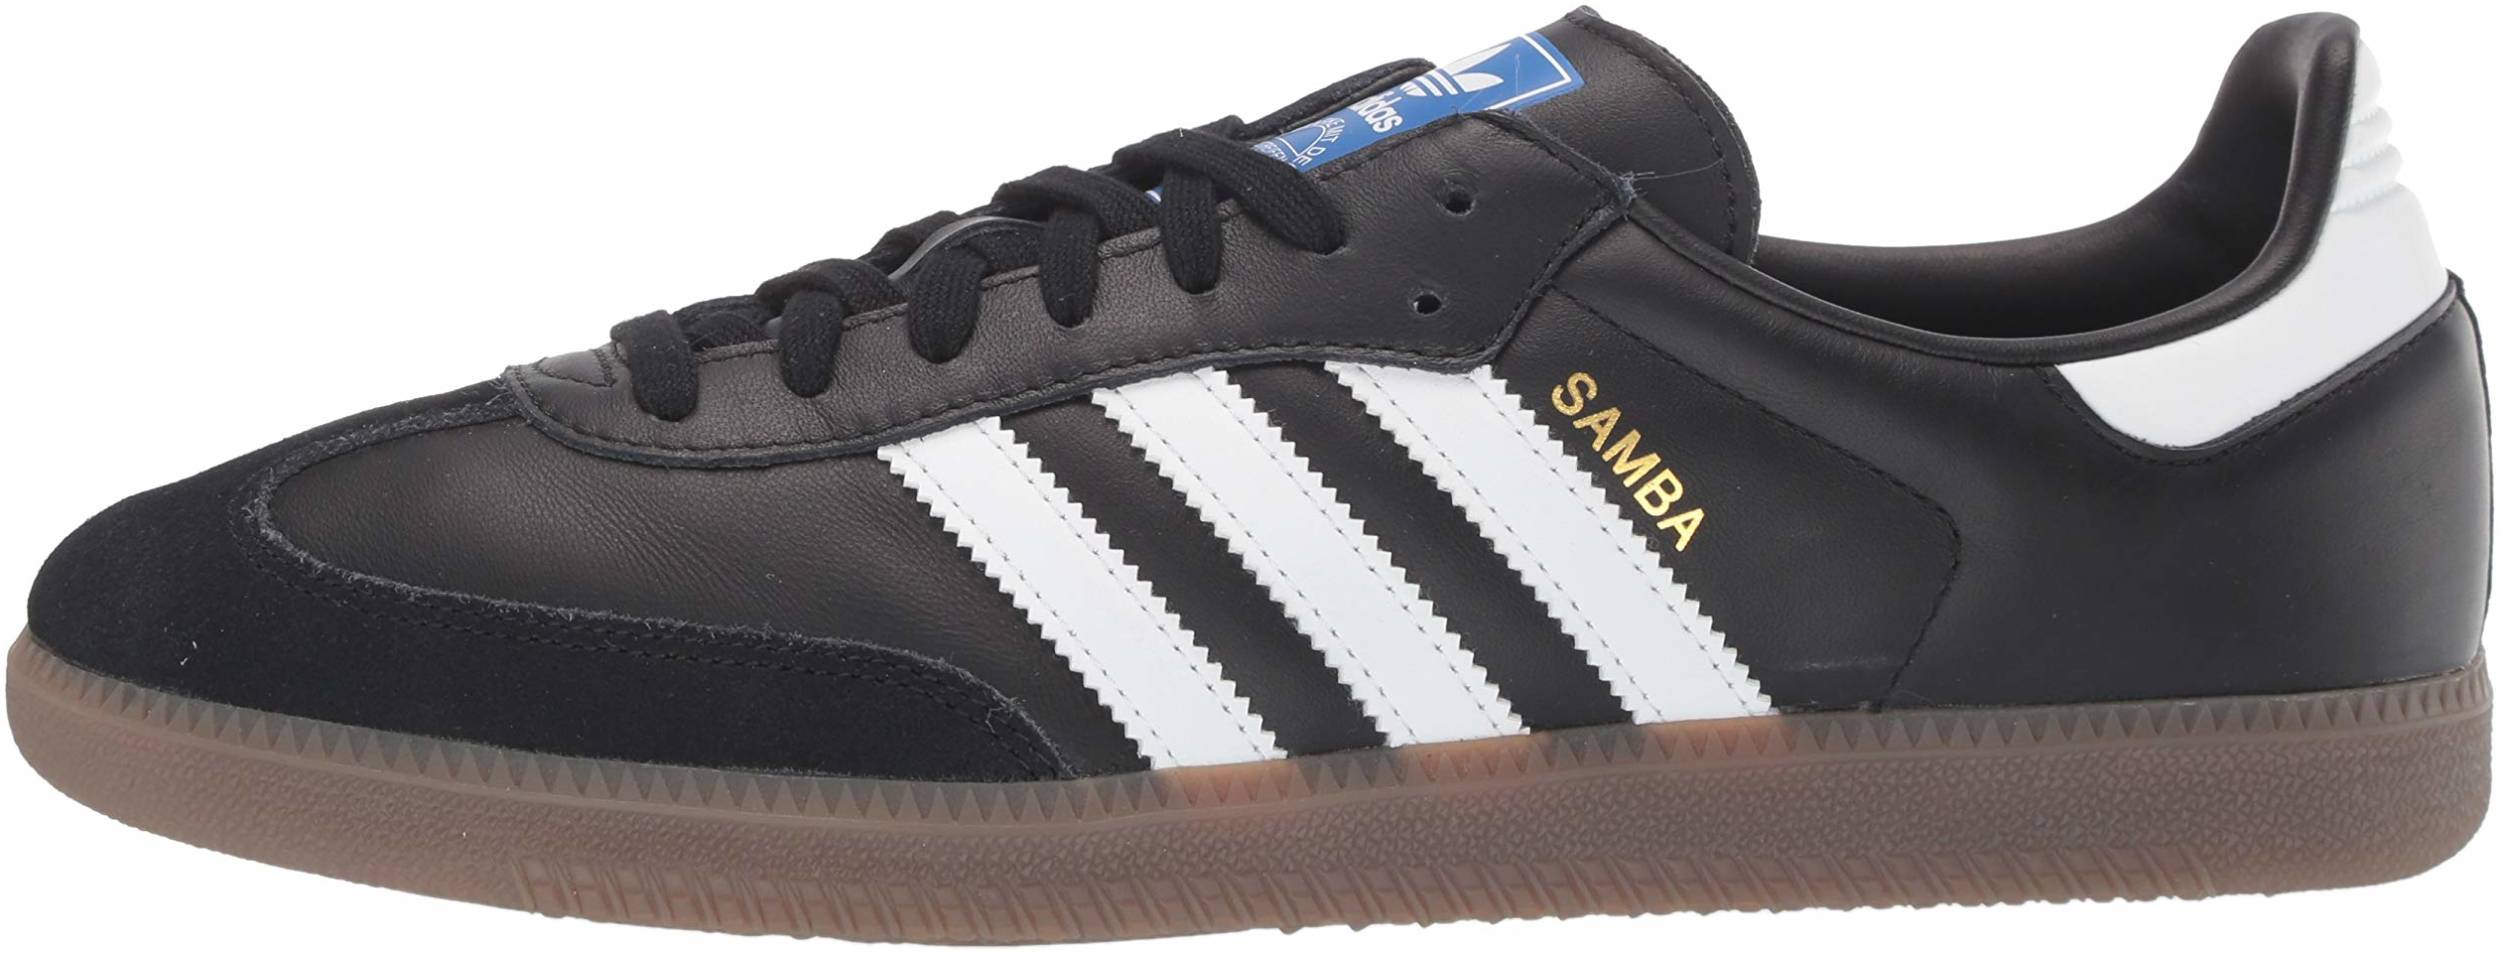 Only $60 + Review of Adidas Samba 